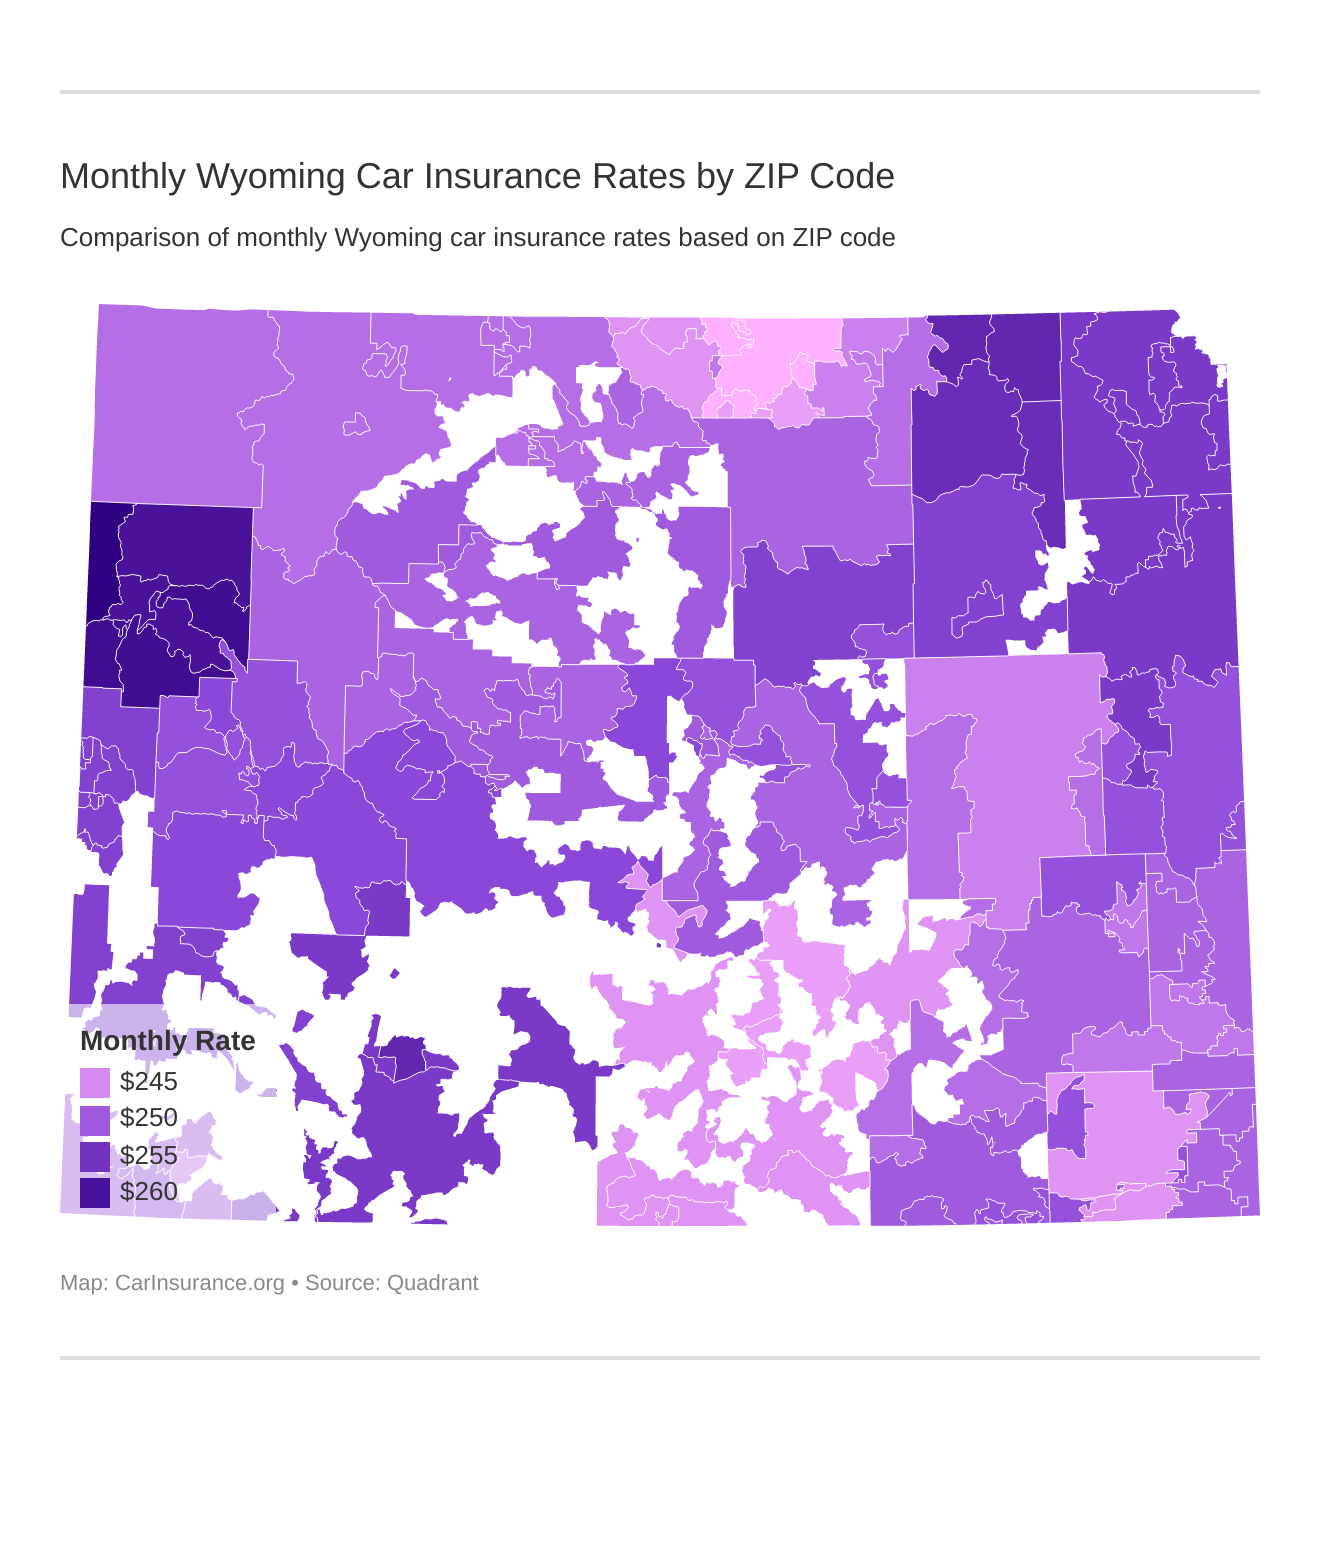 Monthly Wyoming Car Insurance Rates by ZIP Code